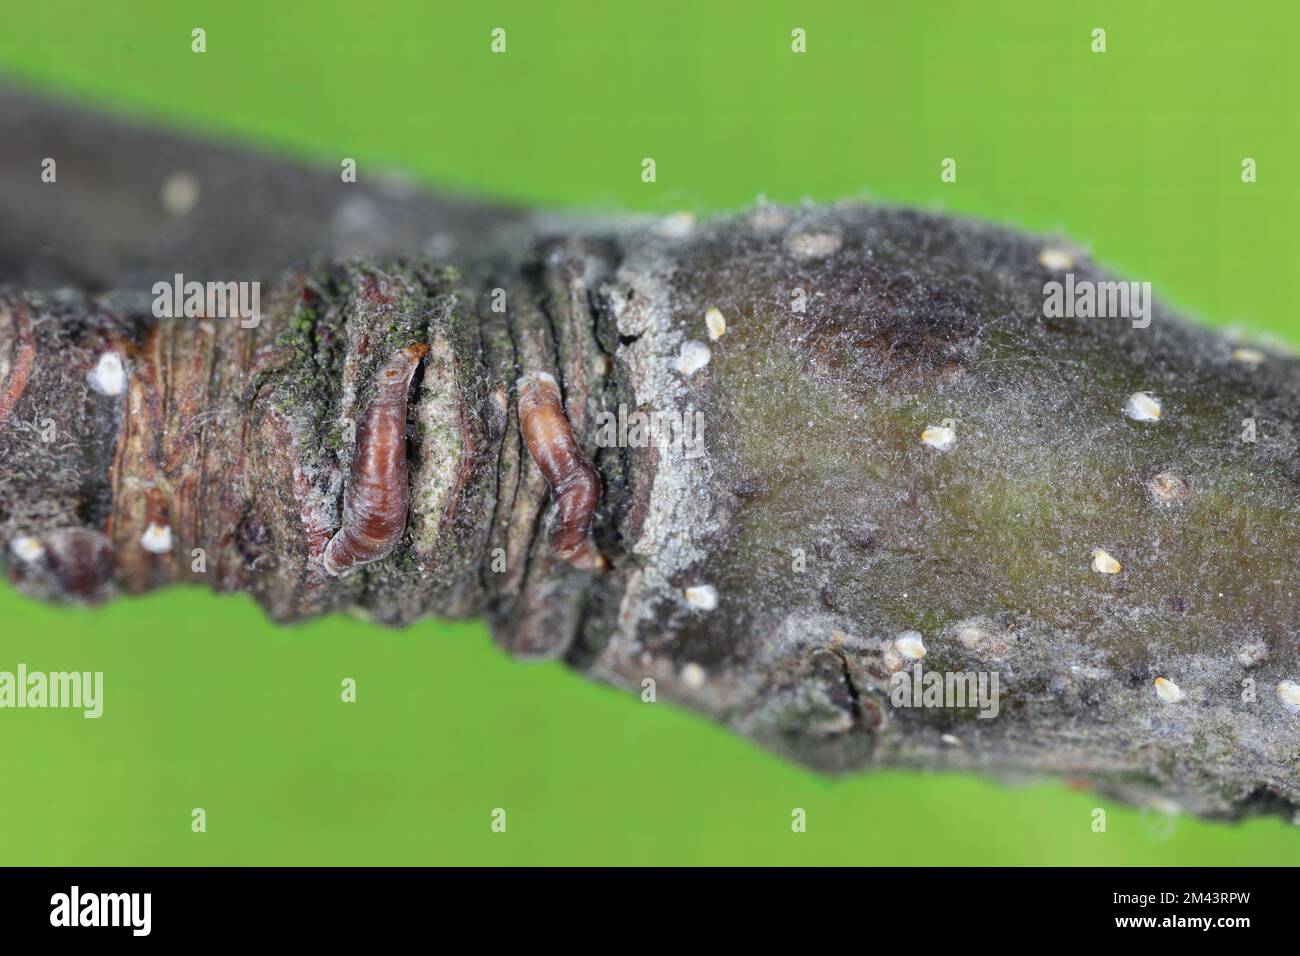 Dealing with Mussel Scale infestations on an apple tree – Herbidacious